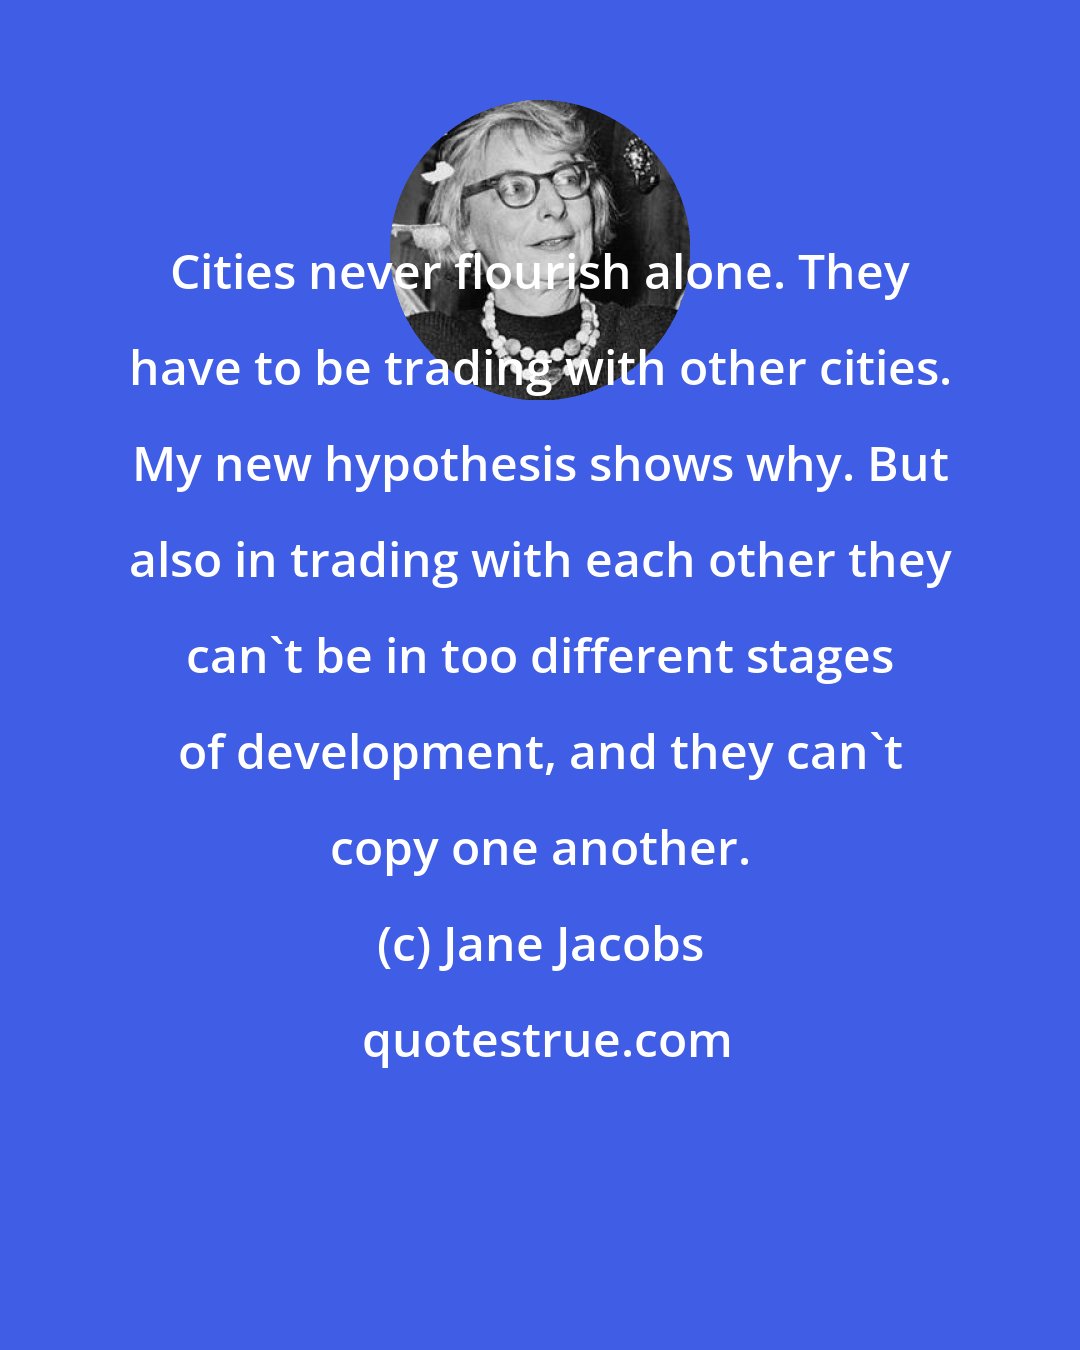 Jane Jacobs: Cities never flourish alone. They have to be trading with other cities. My new hypothesis shows why. But also in trading with each other they can't be in too different stages of development, and they can't copy one another.